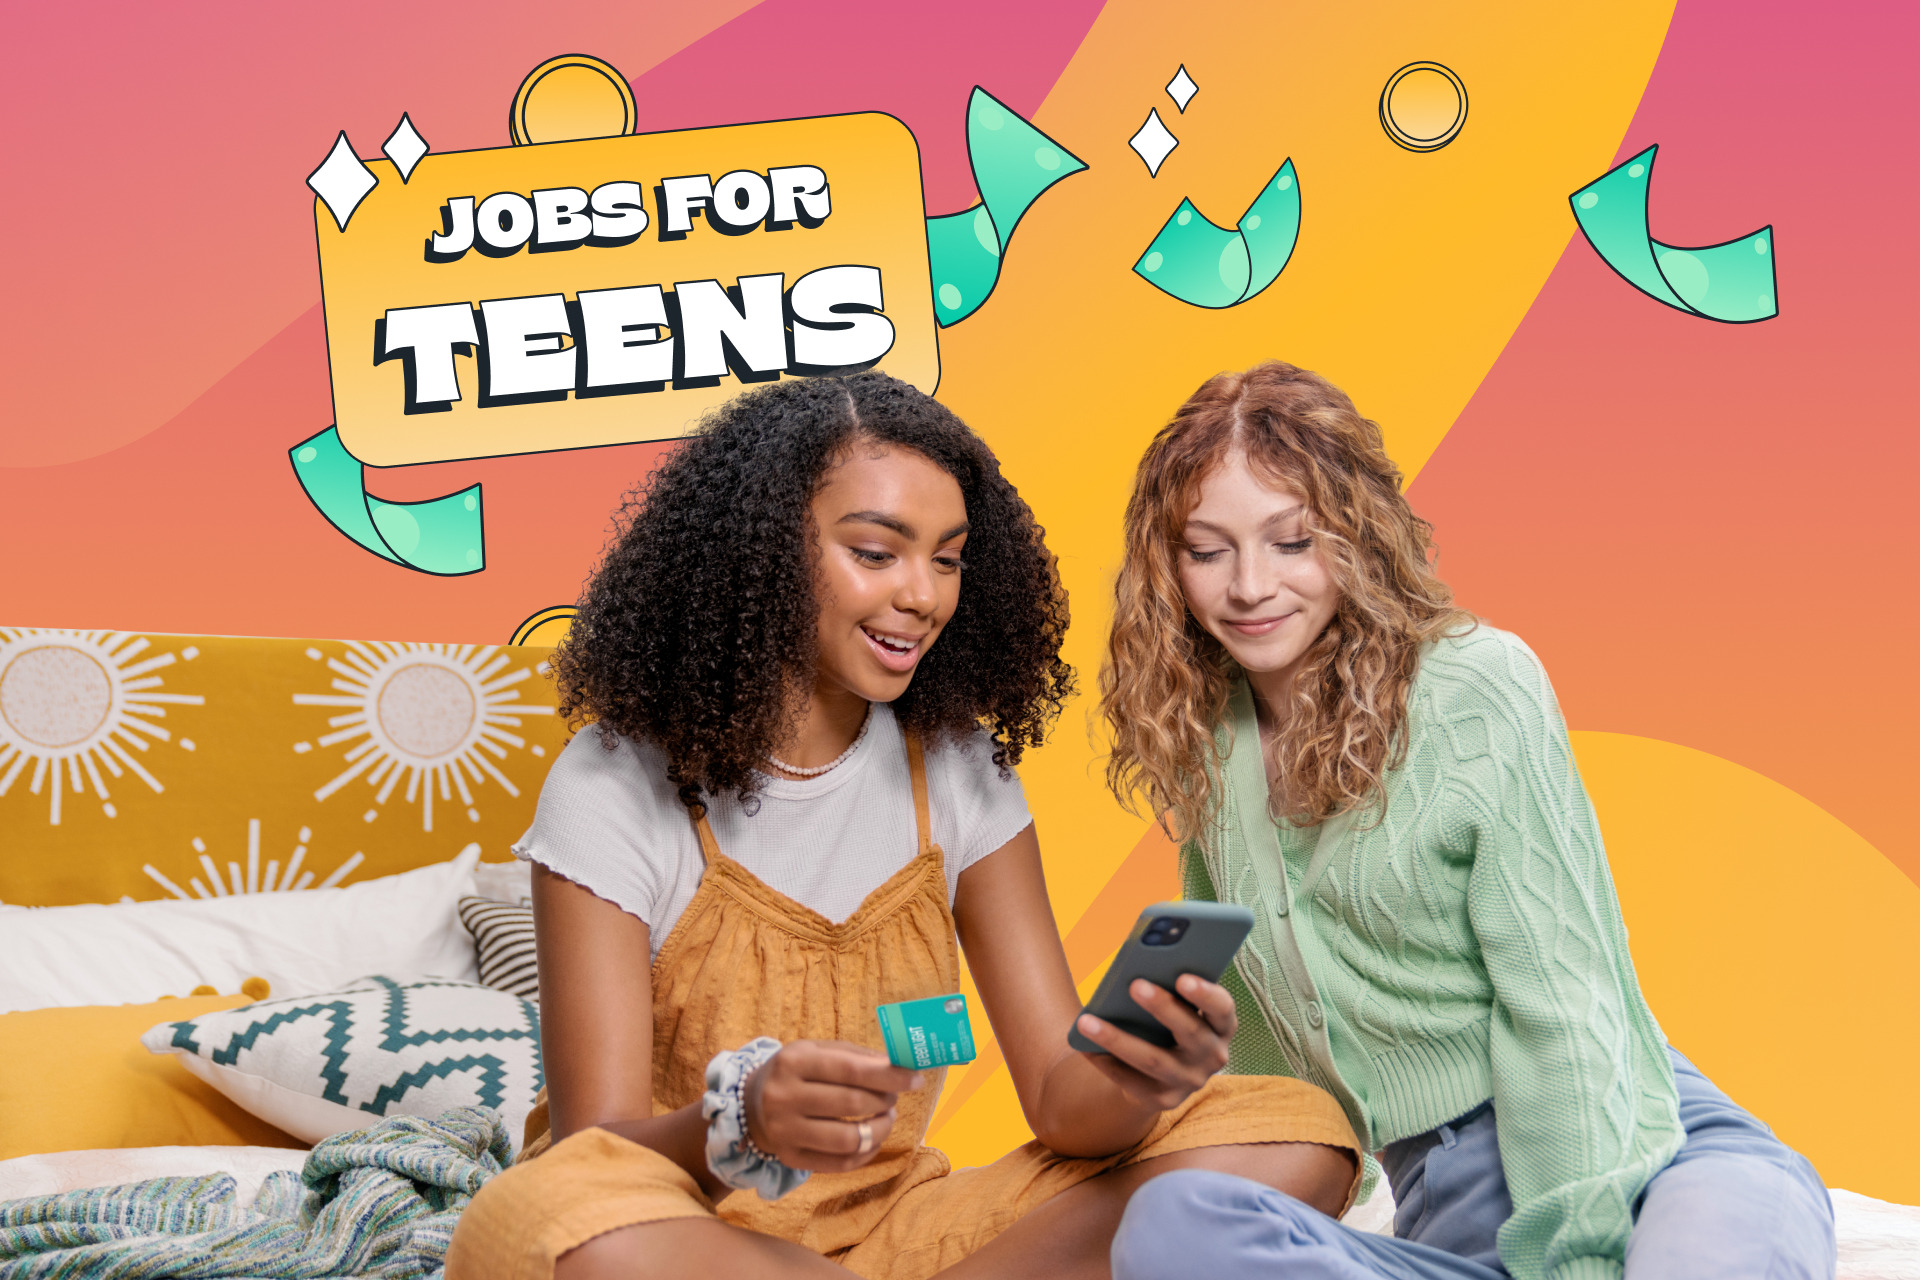 job for teens at 12 years old